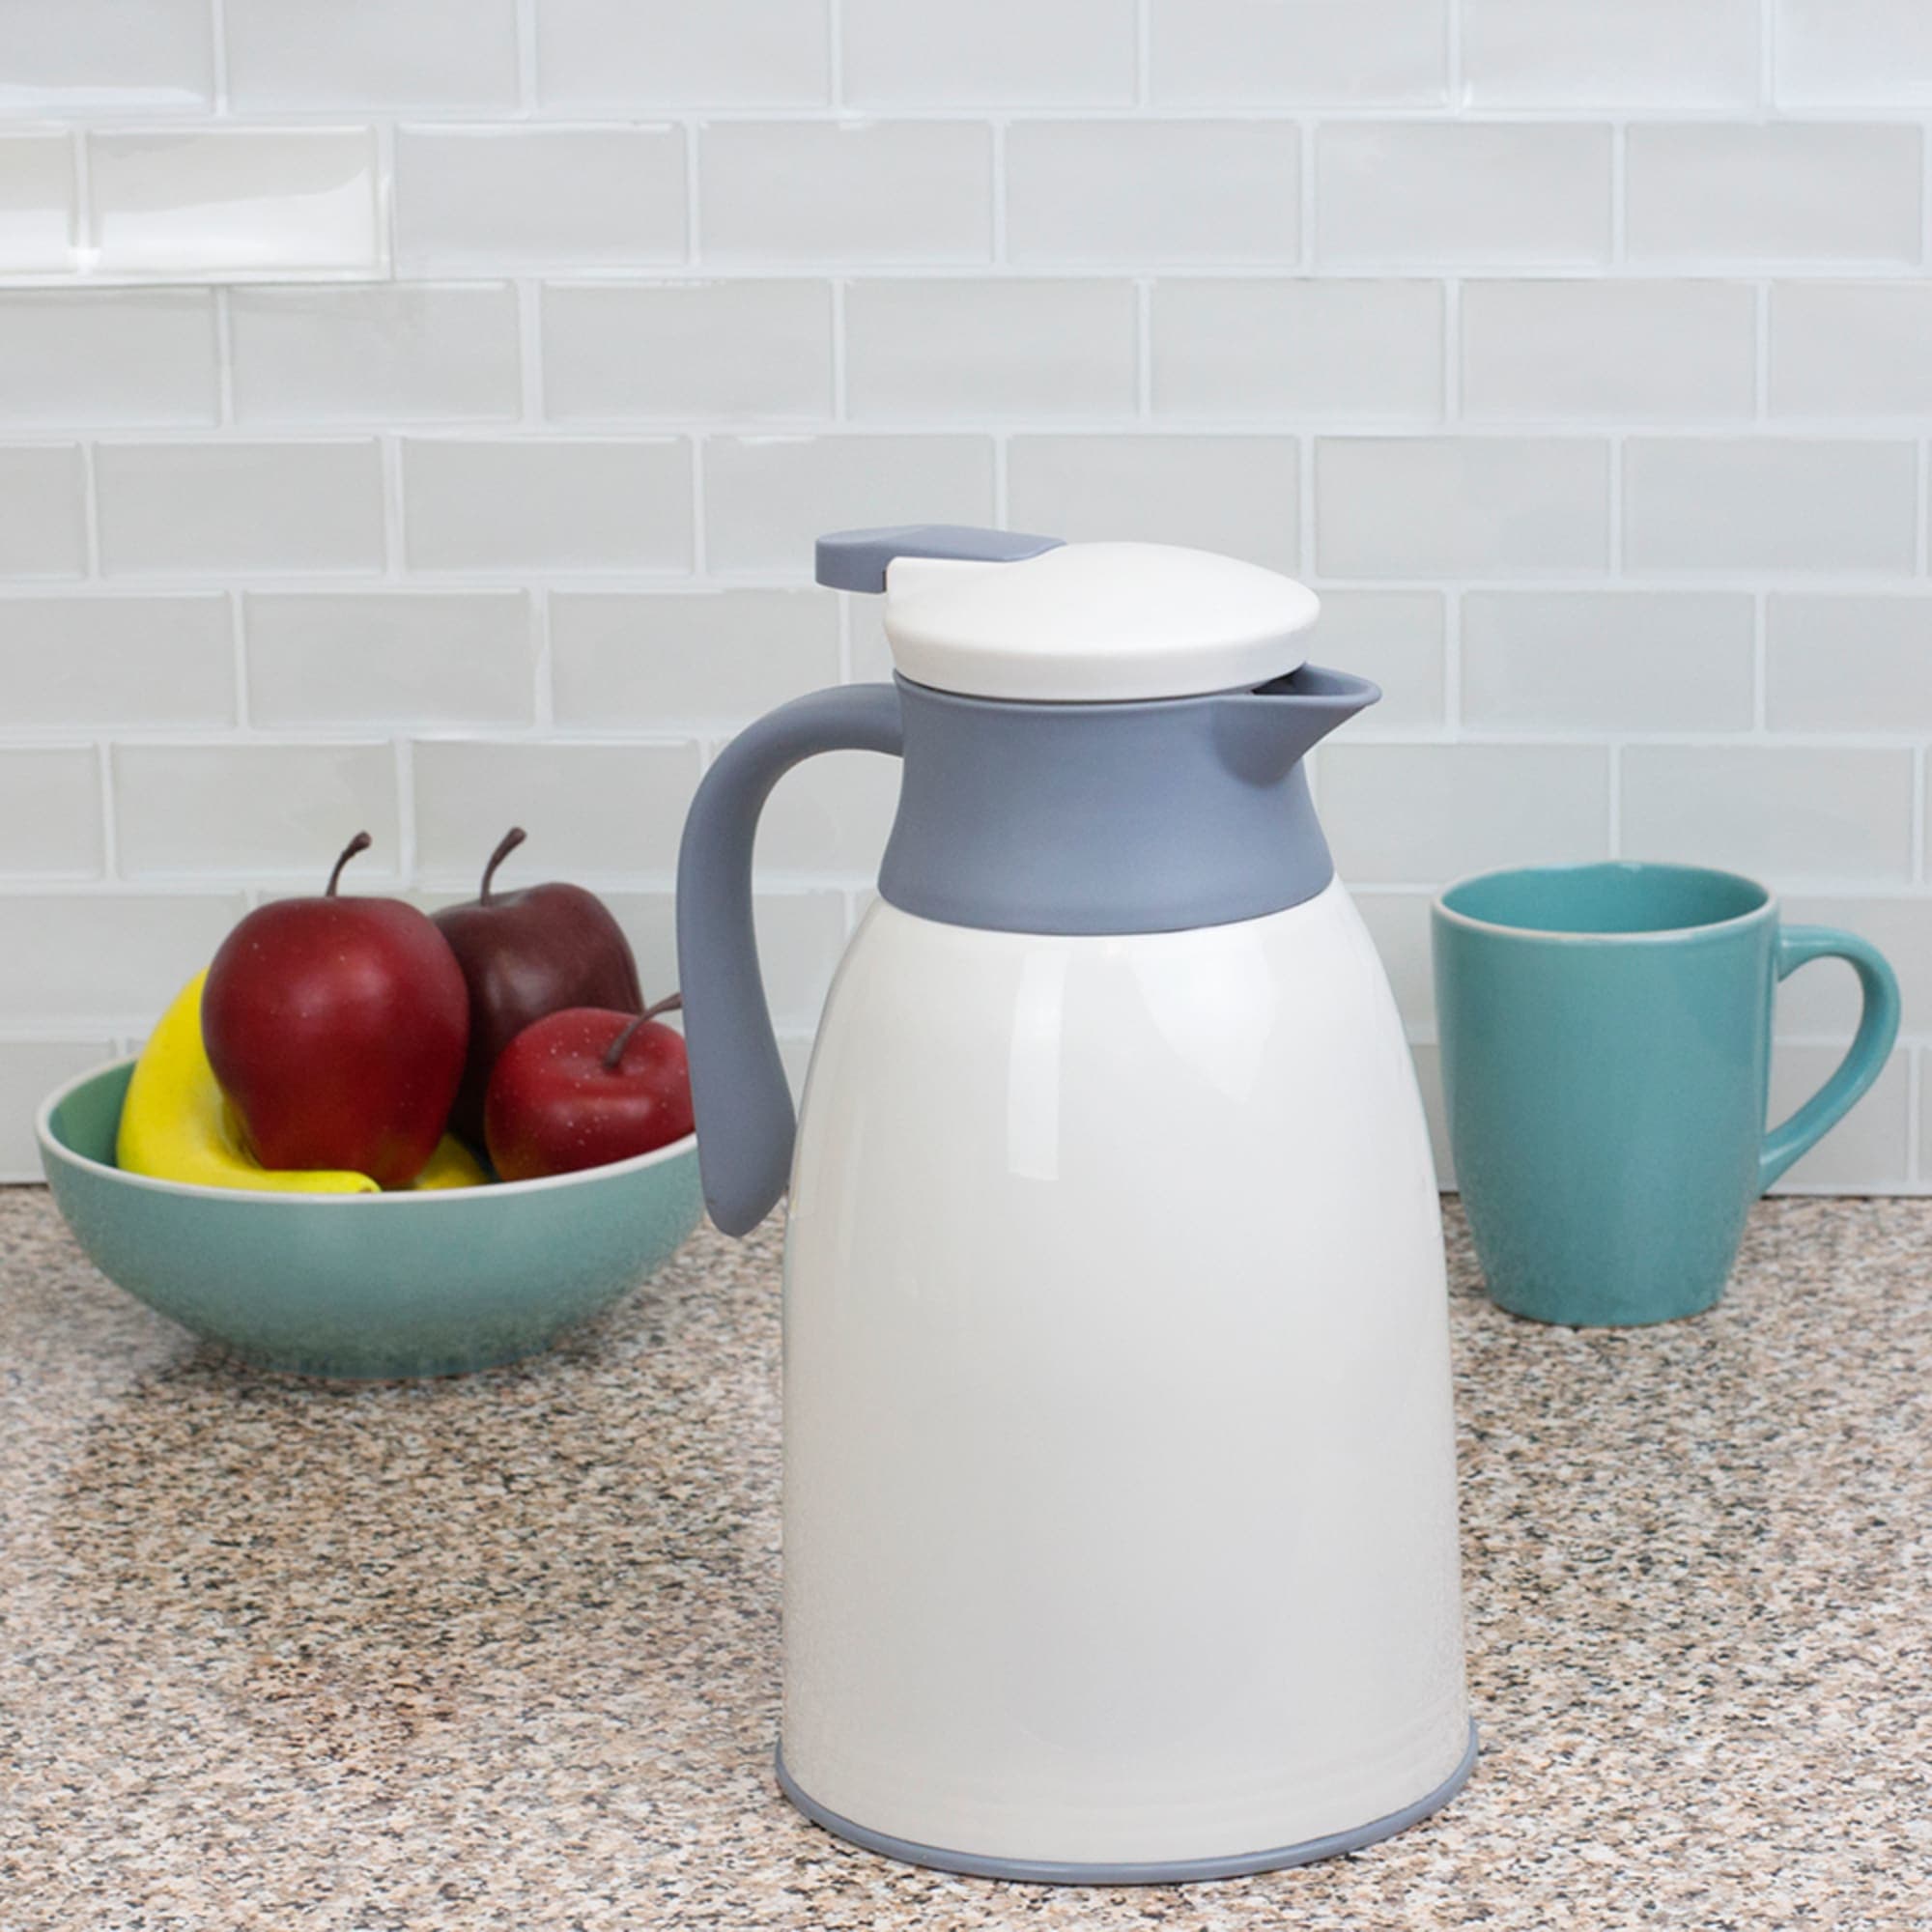 Home Basics 1 Liter Insulated Plastic Carafe, White $7.00 EACH, CASE PACK OF 12